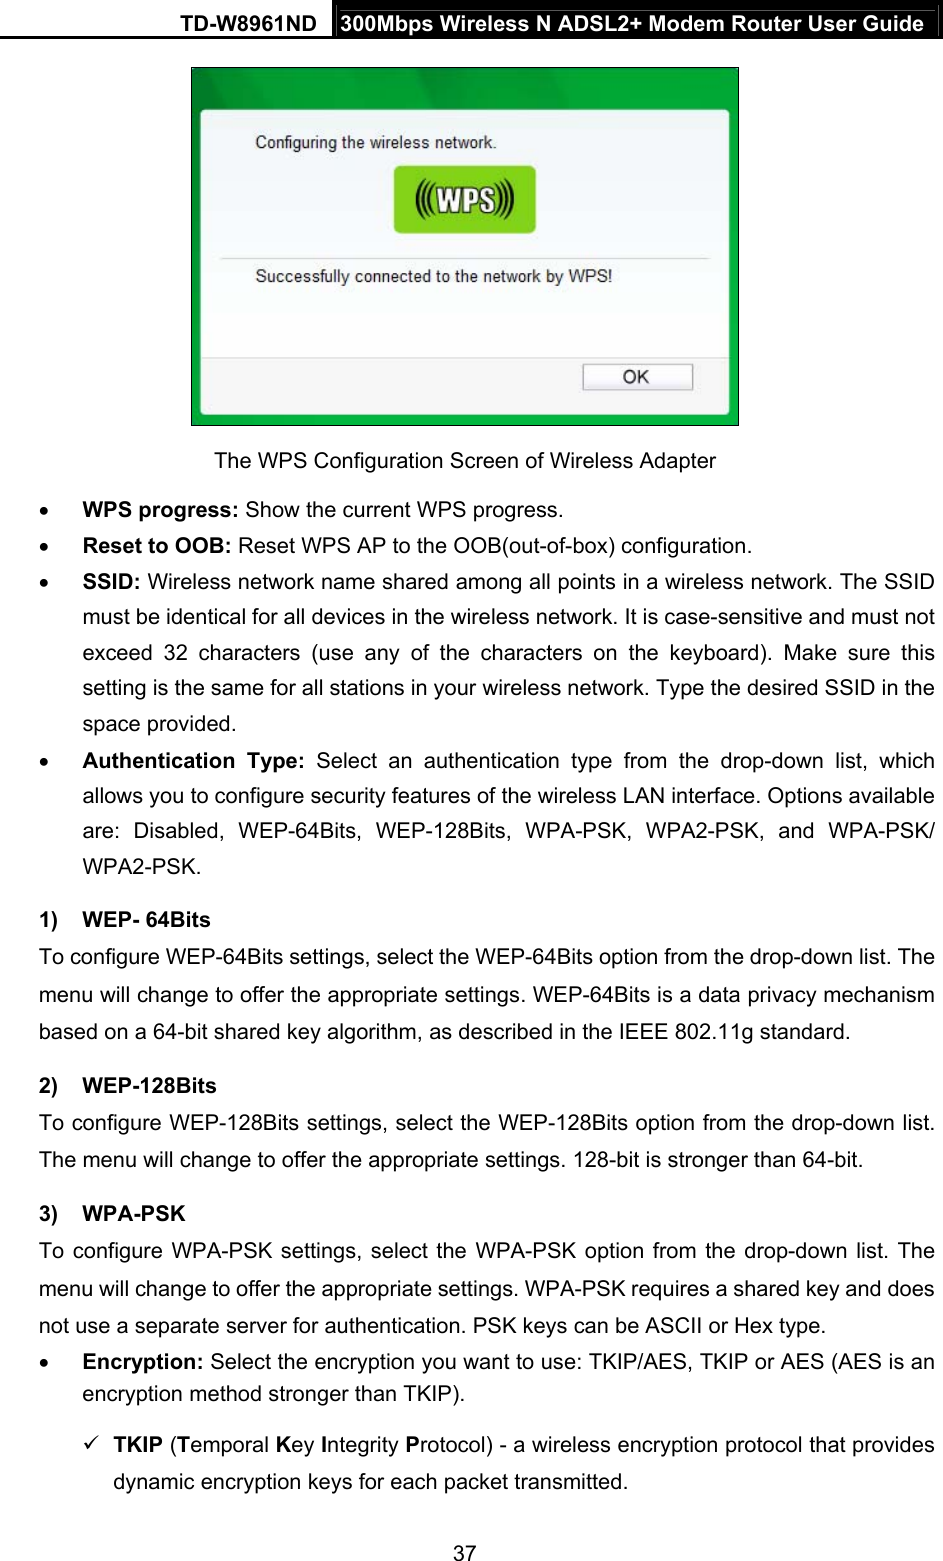 TD-W8961ND  300Mbps Wireless N ADSL2+ Modem Router User Guide  37 The WPS Configuration Screen of Wireless Adapter    WPS progress: Show the current WPS progress.  Reset to OOB: Reset WPS AP to the OOB(out-of-box) configuration.  SSID: Wireless network name shared among all points in a wireless network. The SSID must be identical for all devices in the wireless network. It is case-sensitive and must not exceed 32 characters (use any of the characters on the keyboard). Make sure this setting is the same for all stations in your wireless network. Type the desired SSID in the space provided.  Authentication Type: Select an authentication type from the drop-down list, which allows you to configure security features of the wireless LAN interface. Options available are: Disabled, WEP-64Bits, WEP-128Bits, WPA-PSK, WPA2-PSK, and WPA-PSK/ WPA2-PSK.  1) WEP- 64Bits To configure WEP-64Bits settings, select the WEP-64Bits option from the drop-down list. The menu will change to offer the appropriate settings. WEP-64Bits is a data privacy mechanism based on a 64-bit shared key algorithm, as described in the IEEE 802.11g standard. 2) WEP-128Bits To configure WEP-128Bits settings, select the WEP-128Bits option from the drop-down list. The menu will change to offer the appropriate settings. 128-bit is stronger than 64-bit. 3) WPA-PSK To configure WPA-PSK settings, select the WPA-PSK option from the drop-down list. The menu will change to offer the appropriate settings. WPA-PSK requires a shared key and does not use a separate server for authentication. PSK keys can be ASCII or Hex type.  Encryption: Select the encryption you want to use: TKIP/AES, TKIP or AES (AES is an encryption method stronger than TKIP).  TKIP (Temporal Key Integrity Protocol) - a wireless encryption protocol that provides dynamic encryption keys for each packet transmitted. 